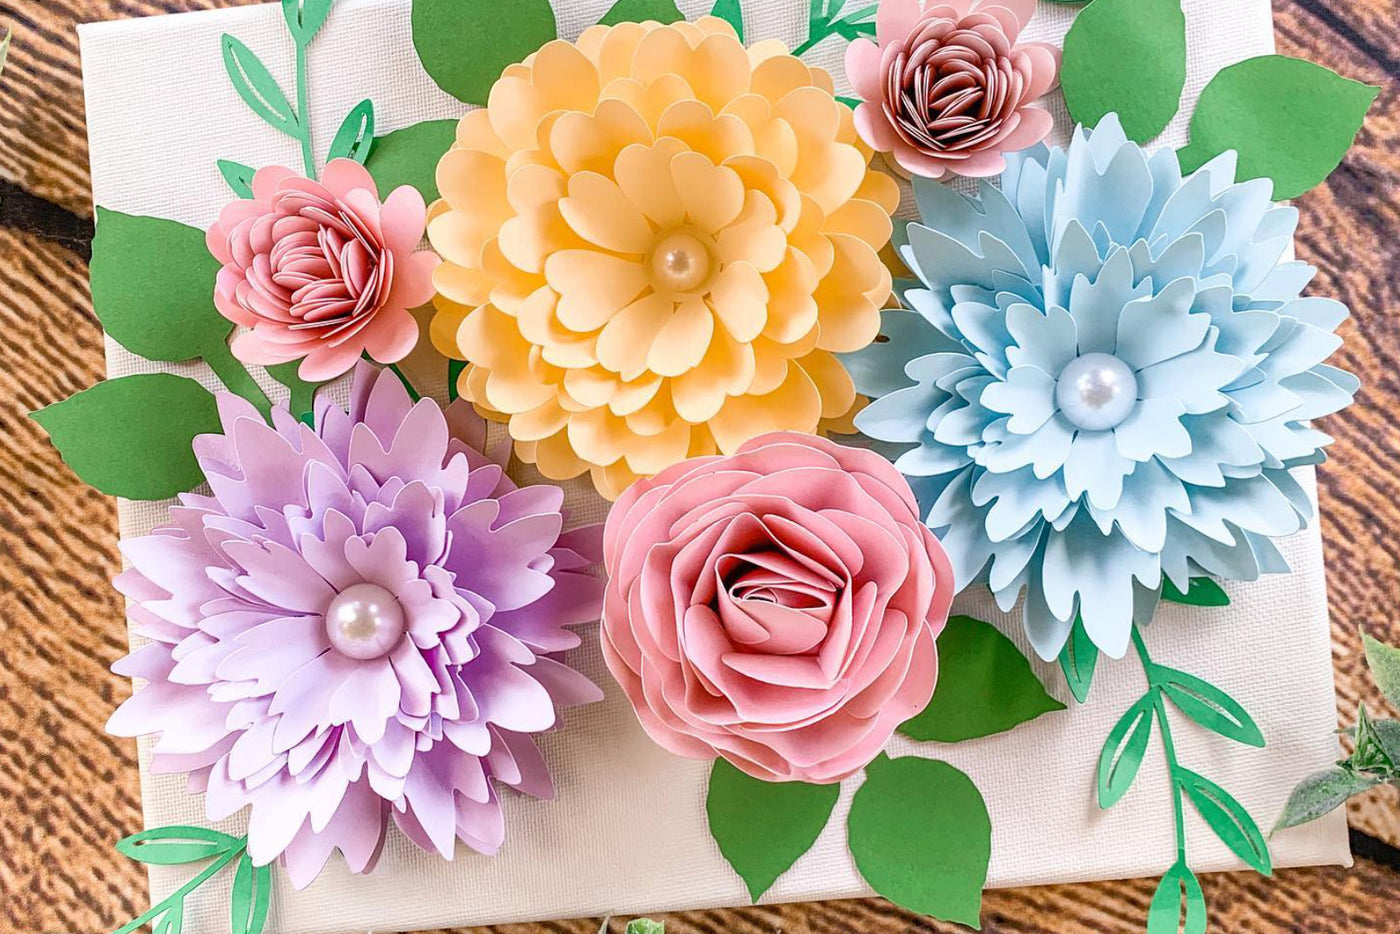 Paper Flower Decoration - Perfect Backdrop for any Event or Room Decor, Mayuri Dhanad